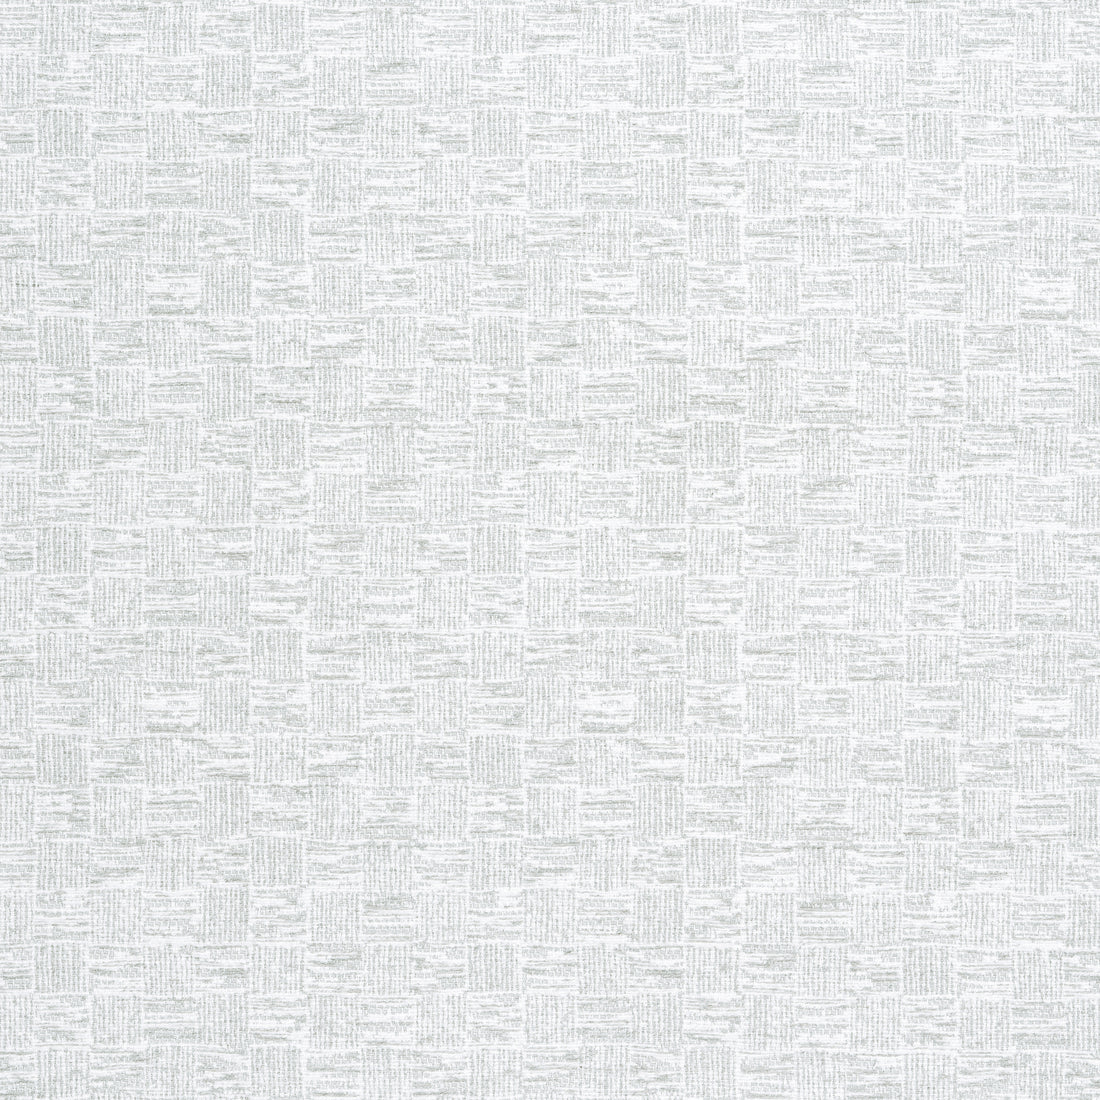 Cestino fabric in sterling color - pattern number W8517 - by Thibaut in the Villa collection